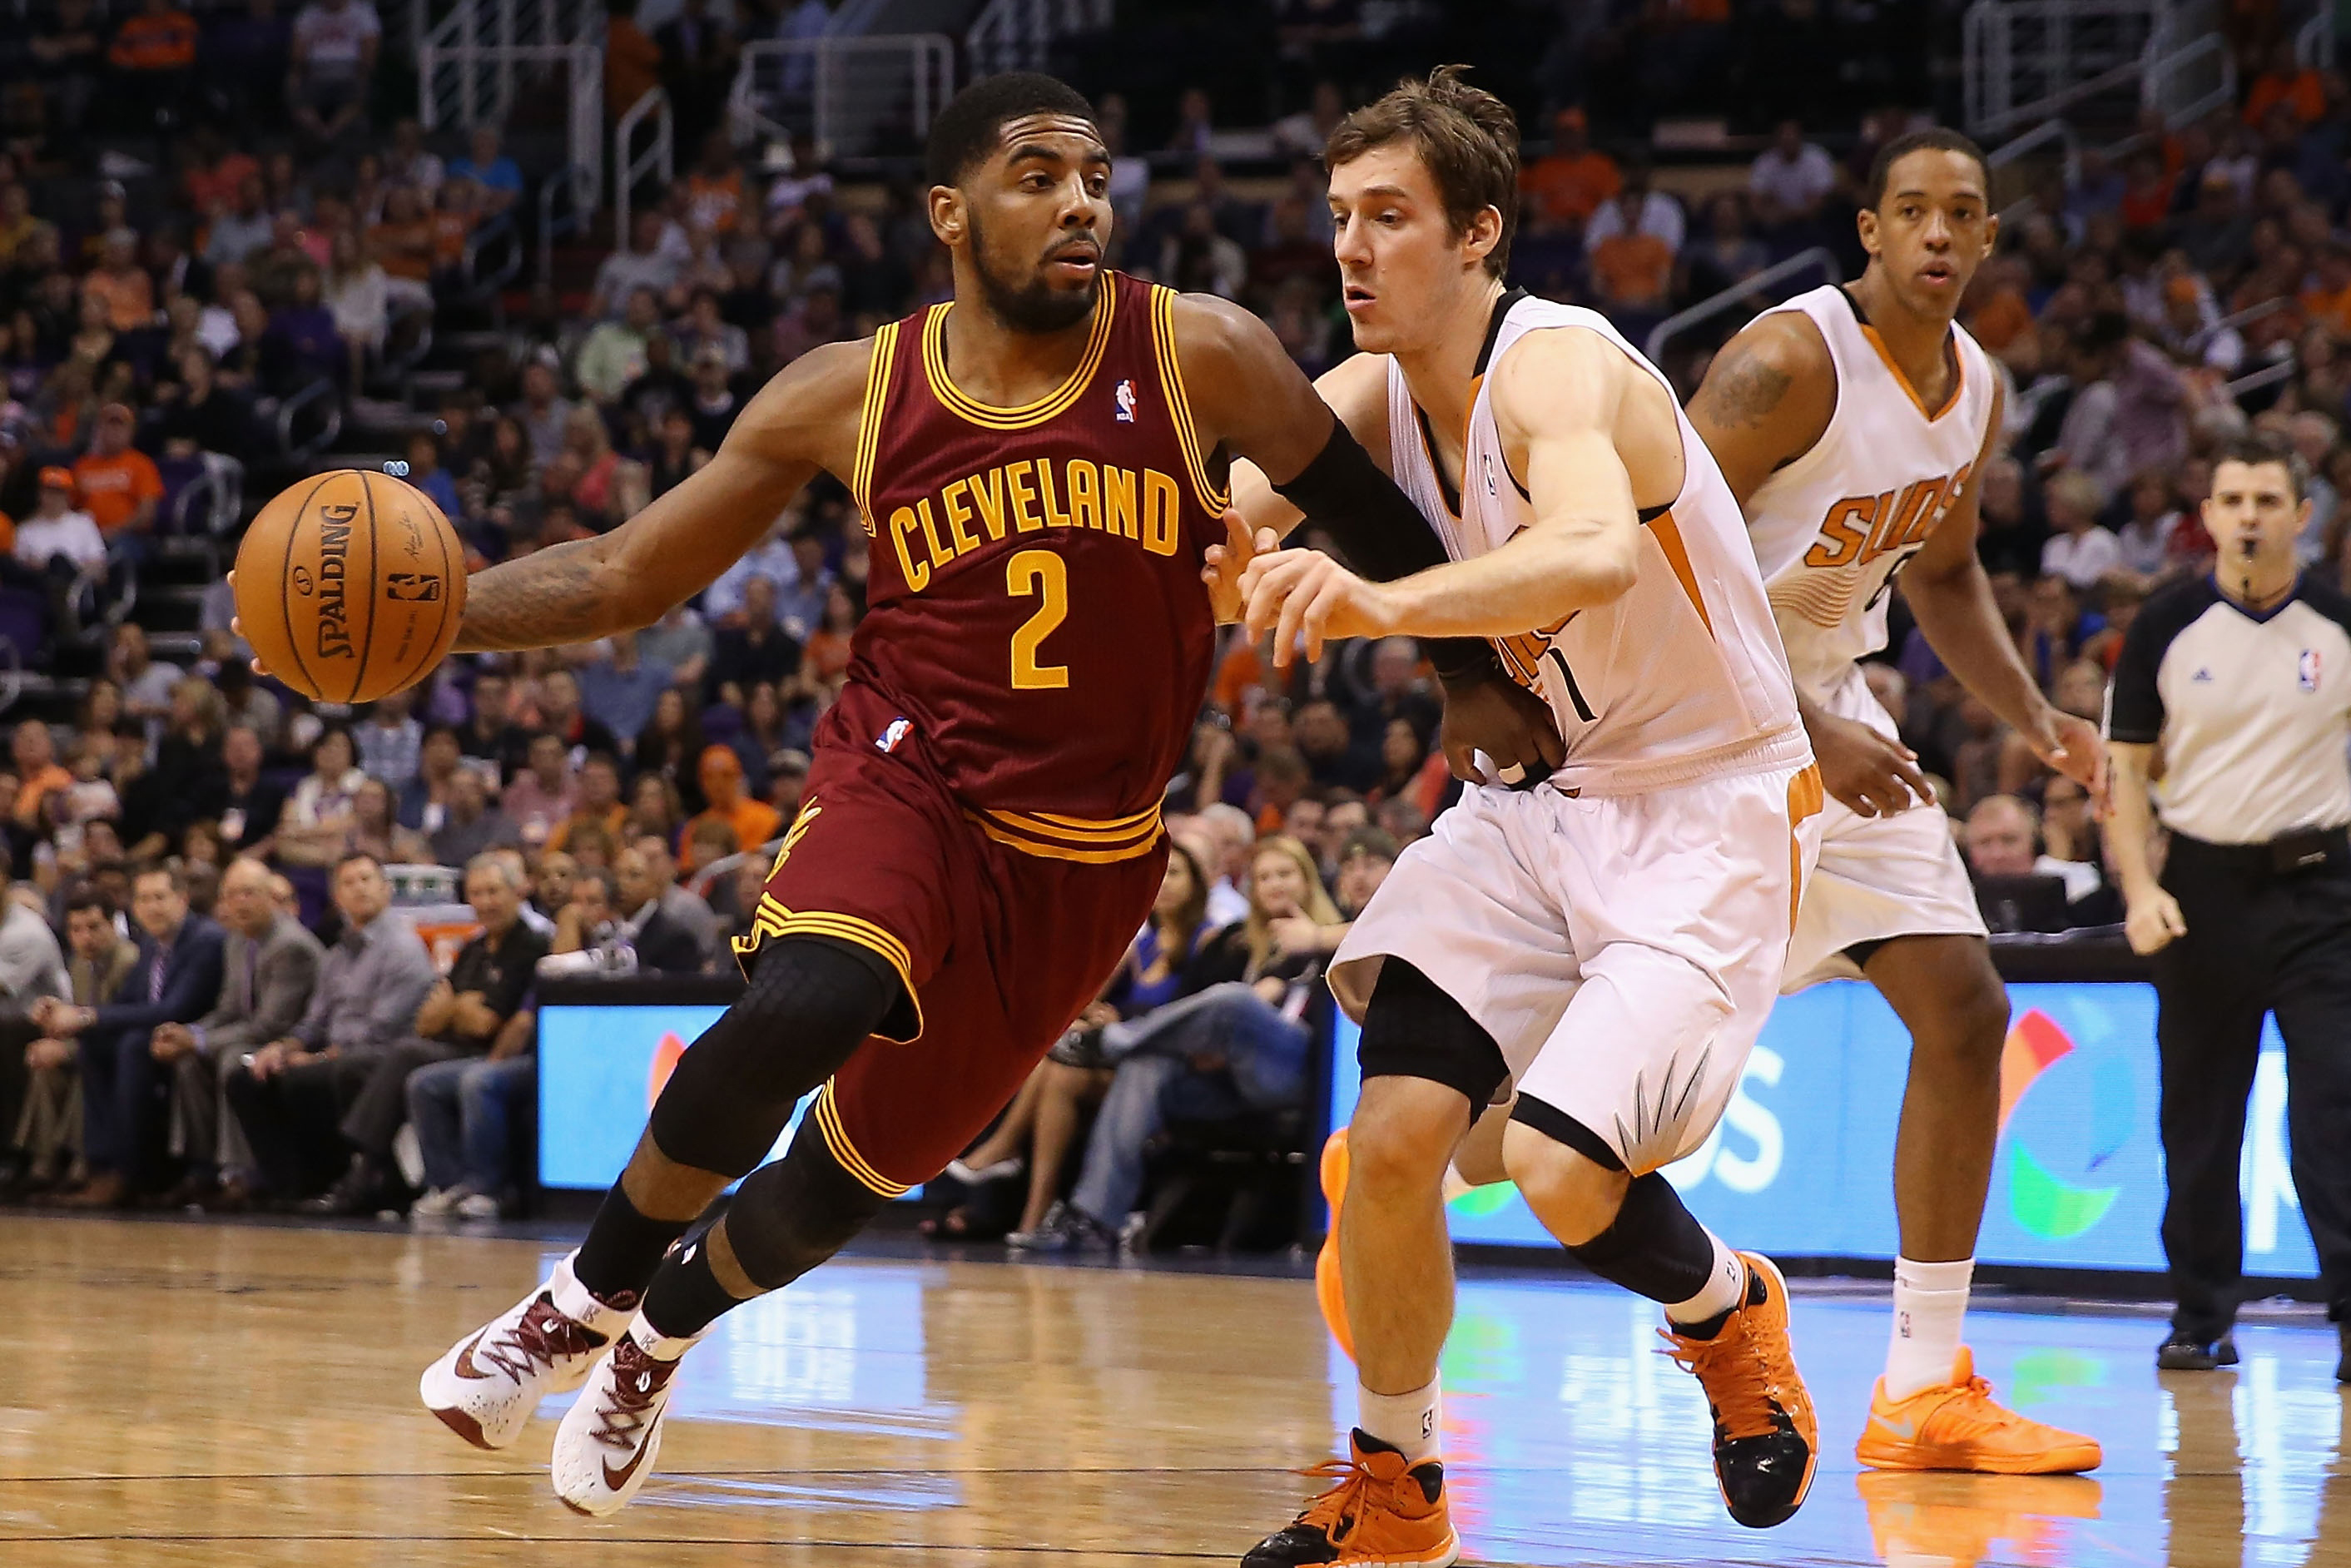 The Top Crossovers From the 2014-2015 NBA Basketball Season featuring Kyrie Irving ...2825 x 1884